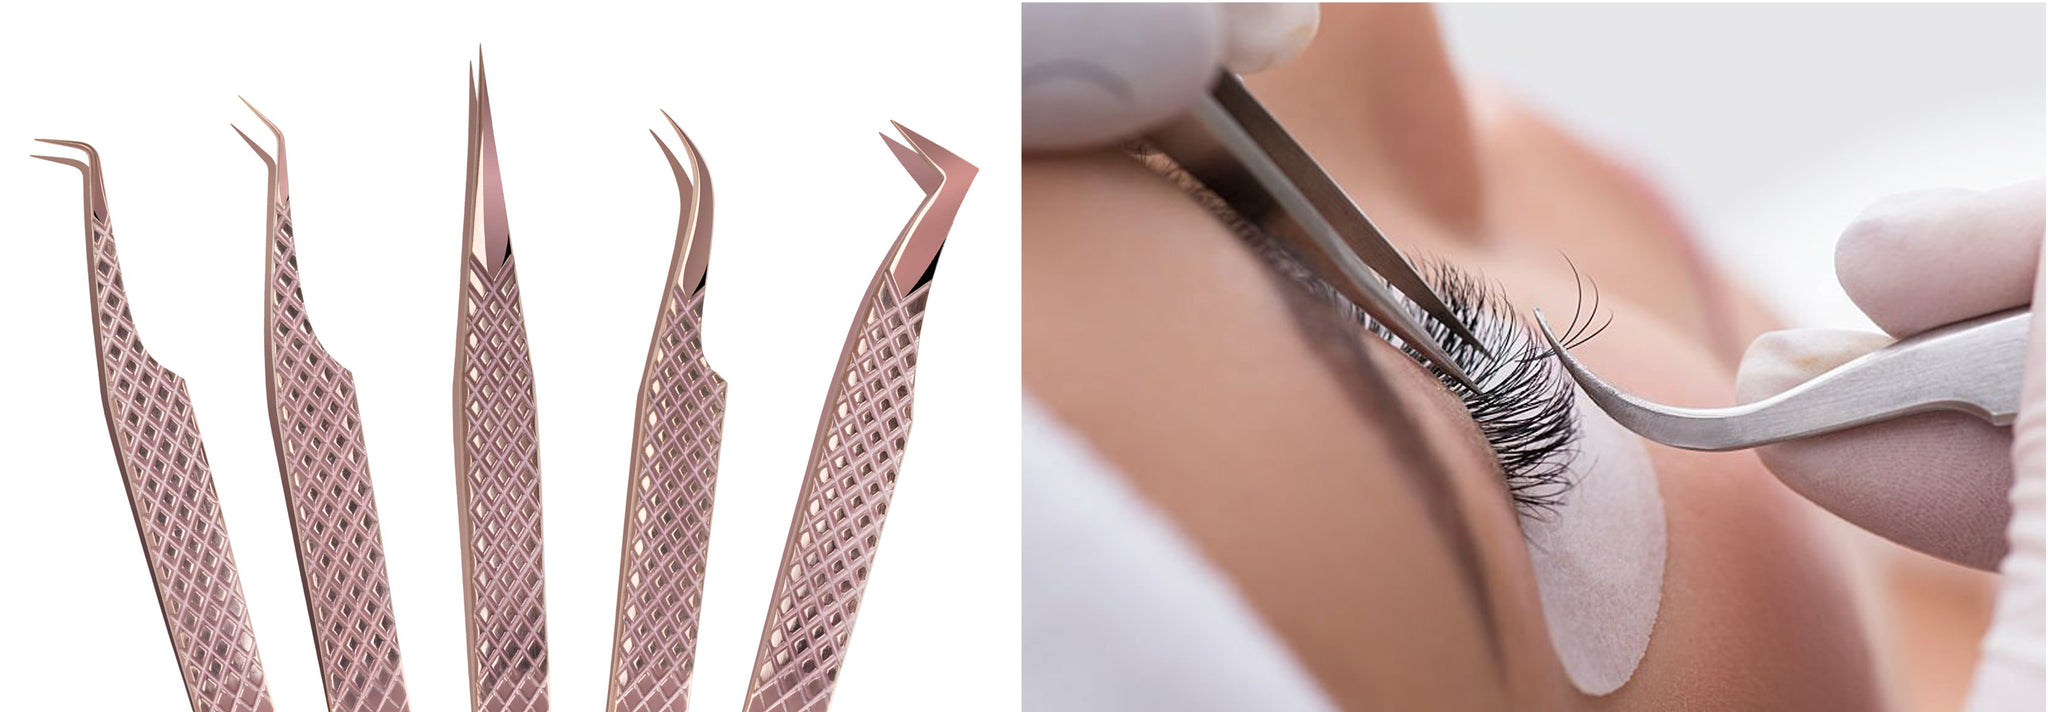 An assortment of specialized tweezers on the left, designed for various purposes. On the right, a lash technician skillfully employs two distinct tweezers - one for precise lash isolation and the other for meticulous application